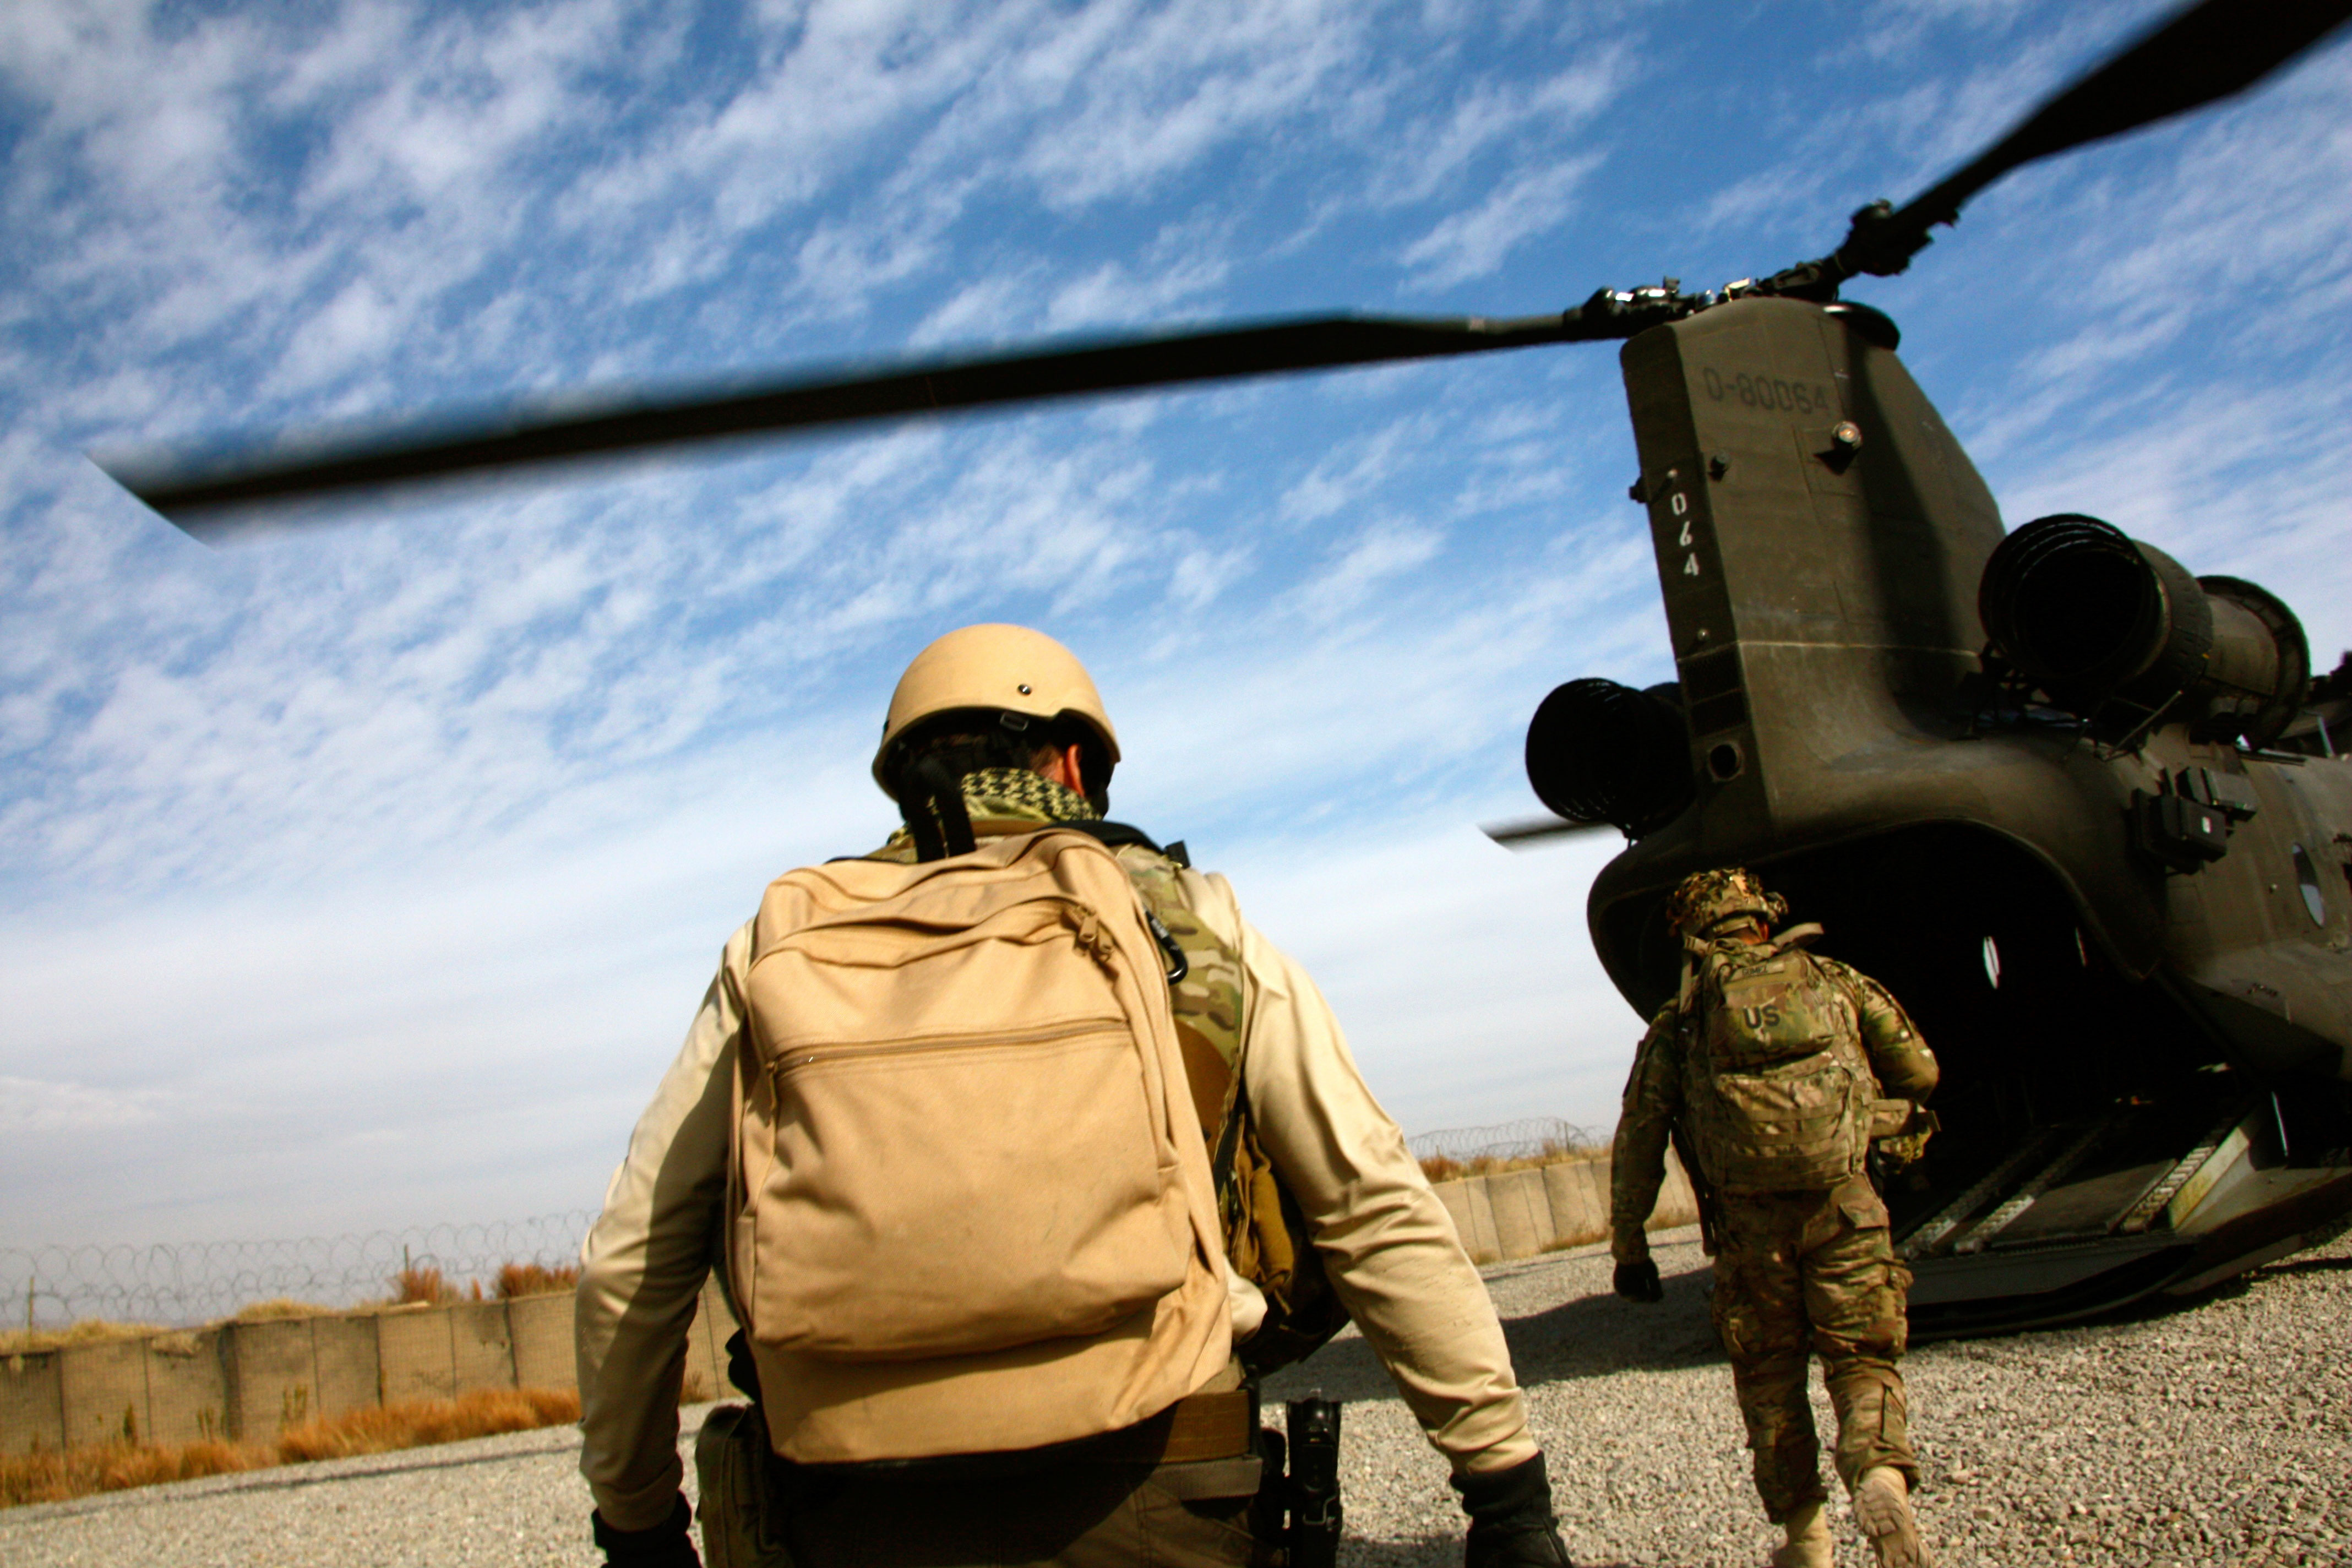 U.S. Army soldiers on a mission in Afghanistan.